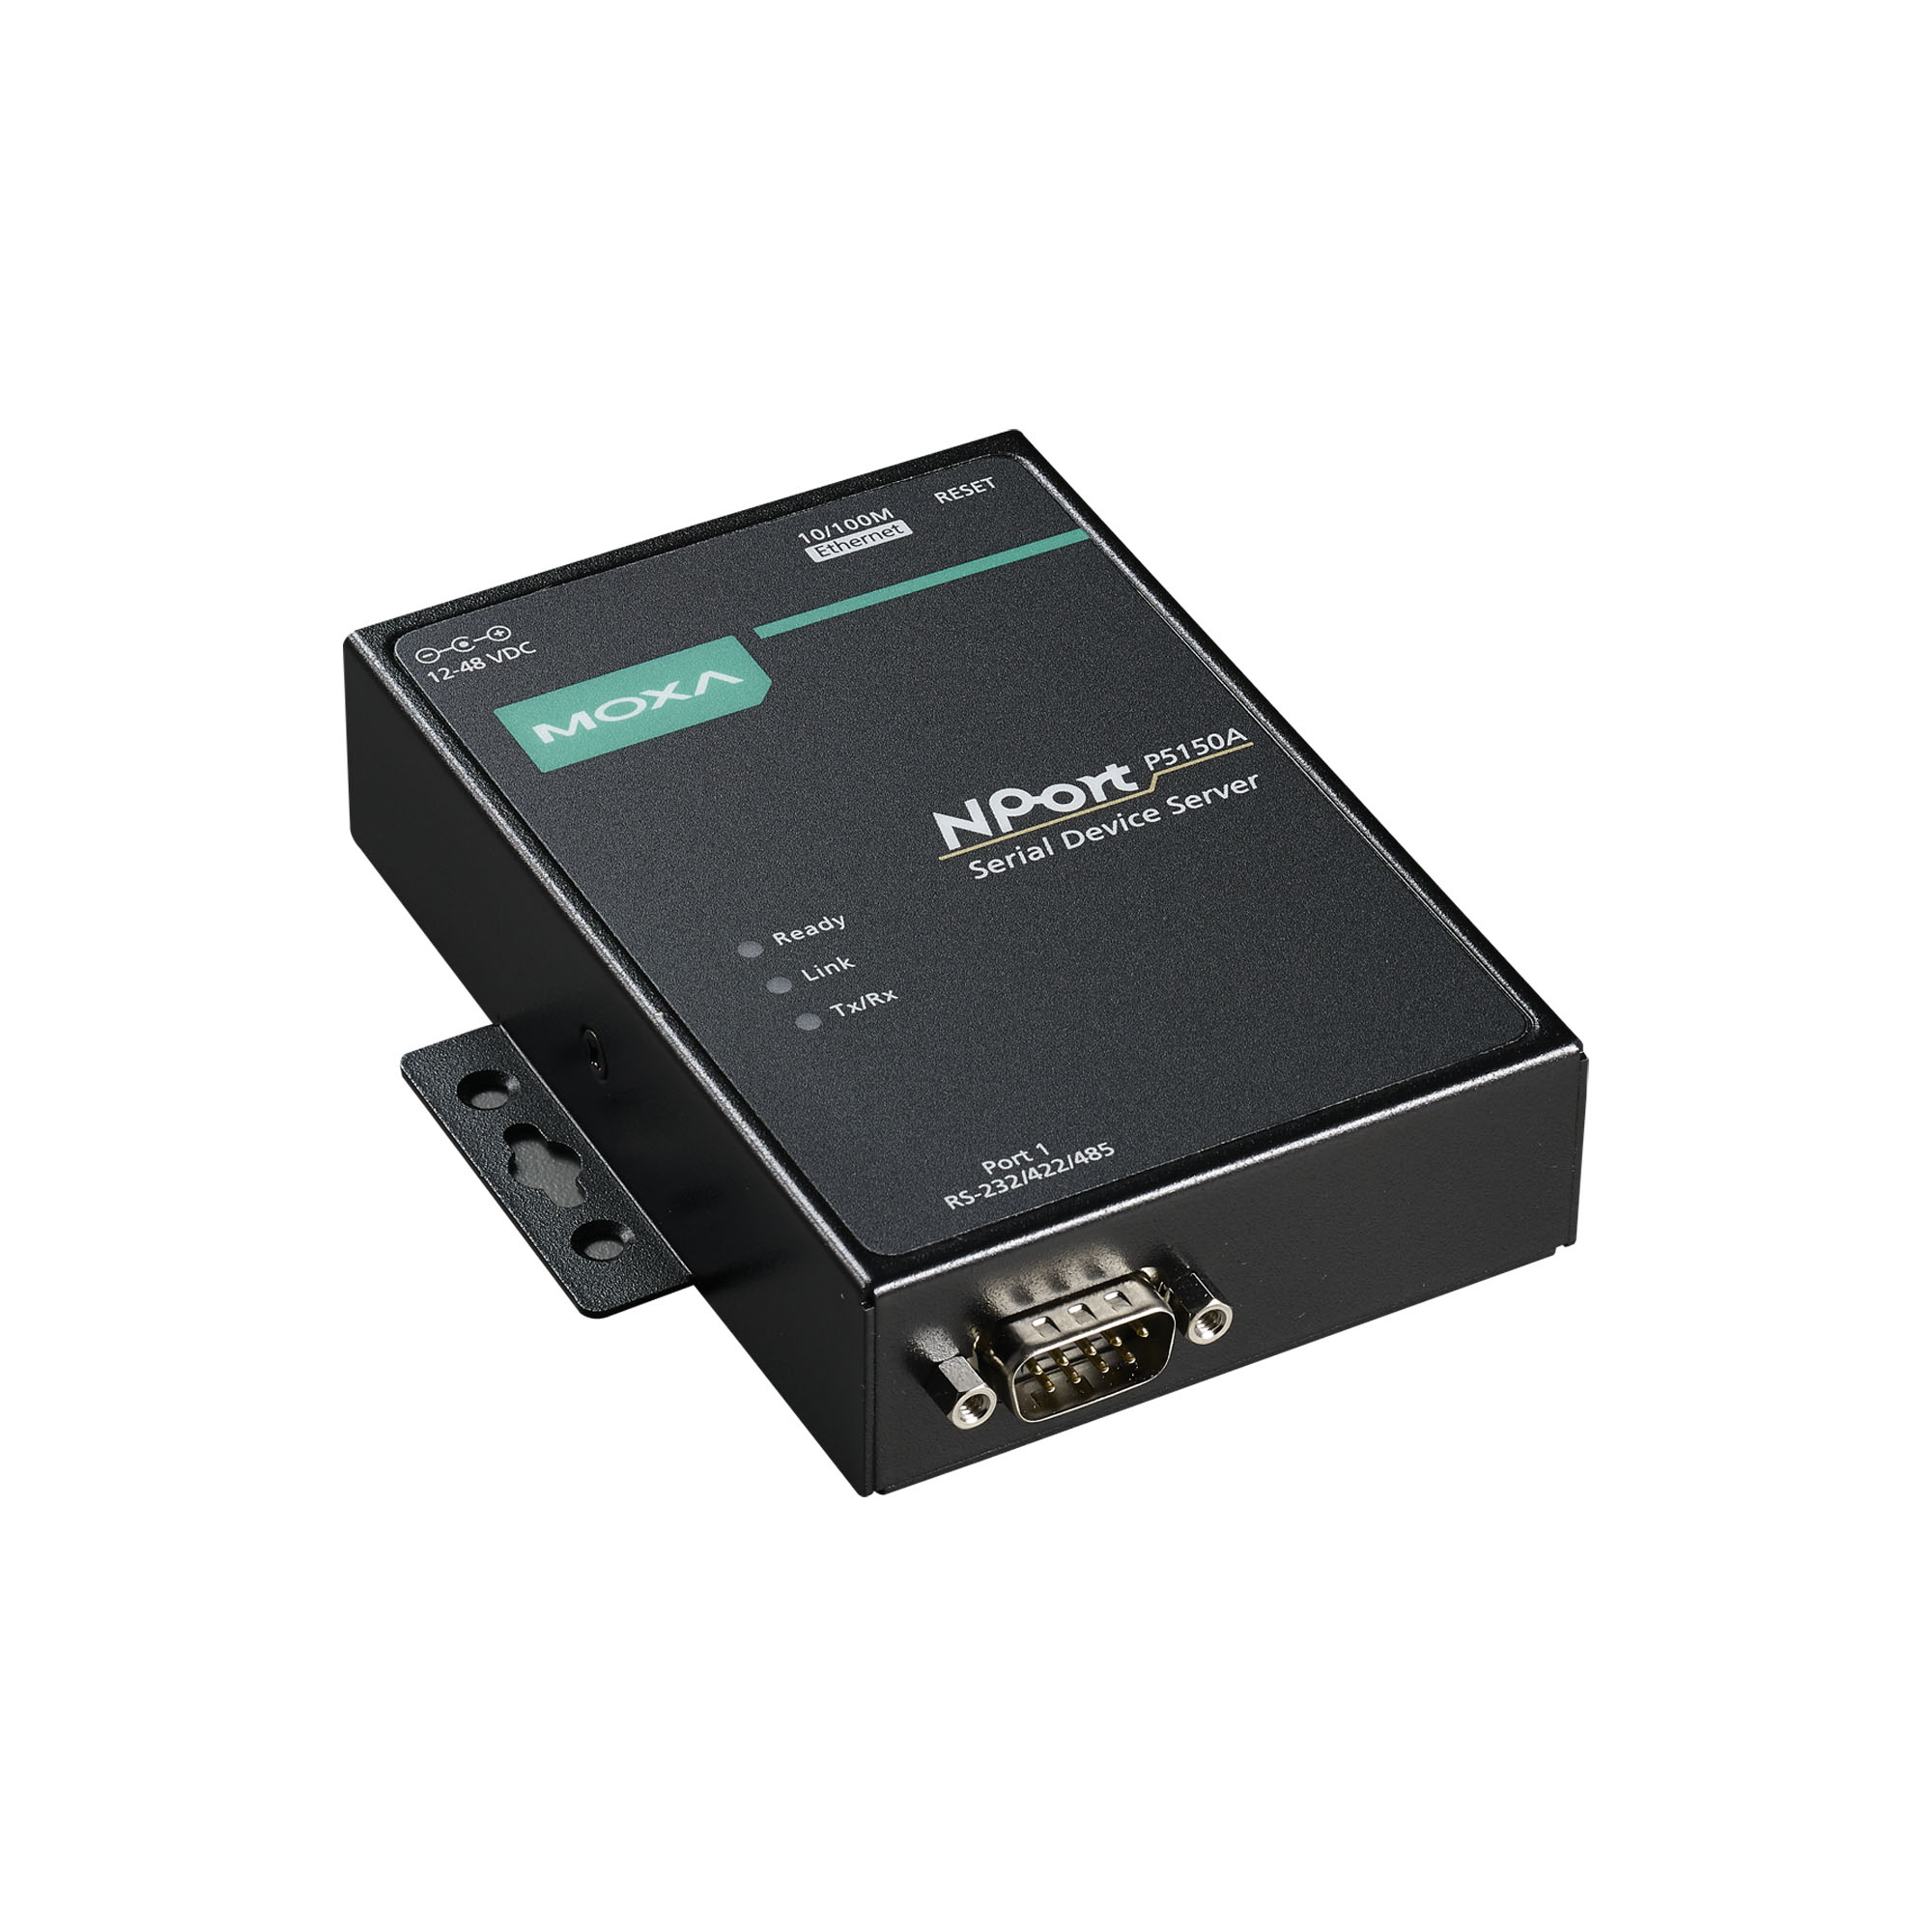 NPort P5150A Series - General Device Servers | MOXA